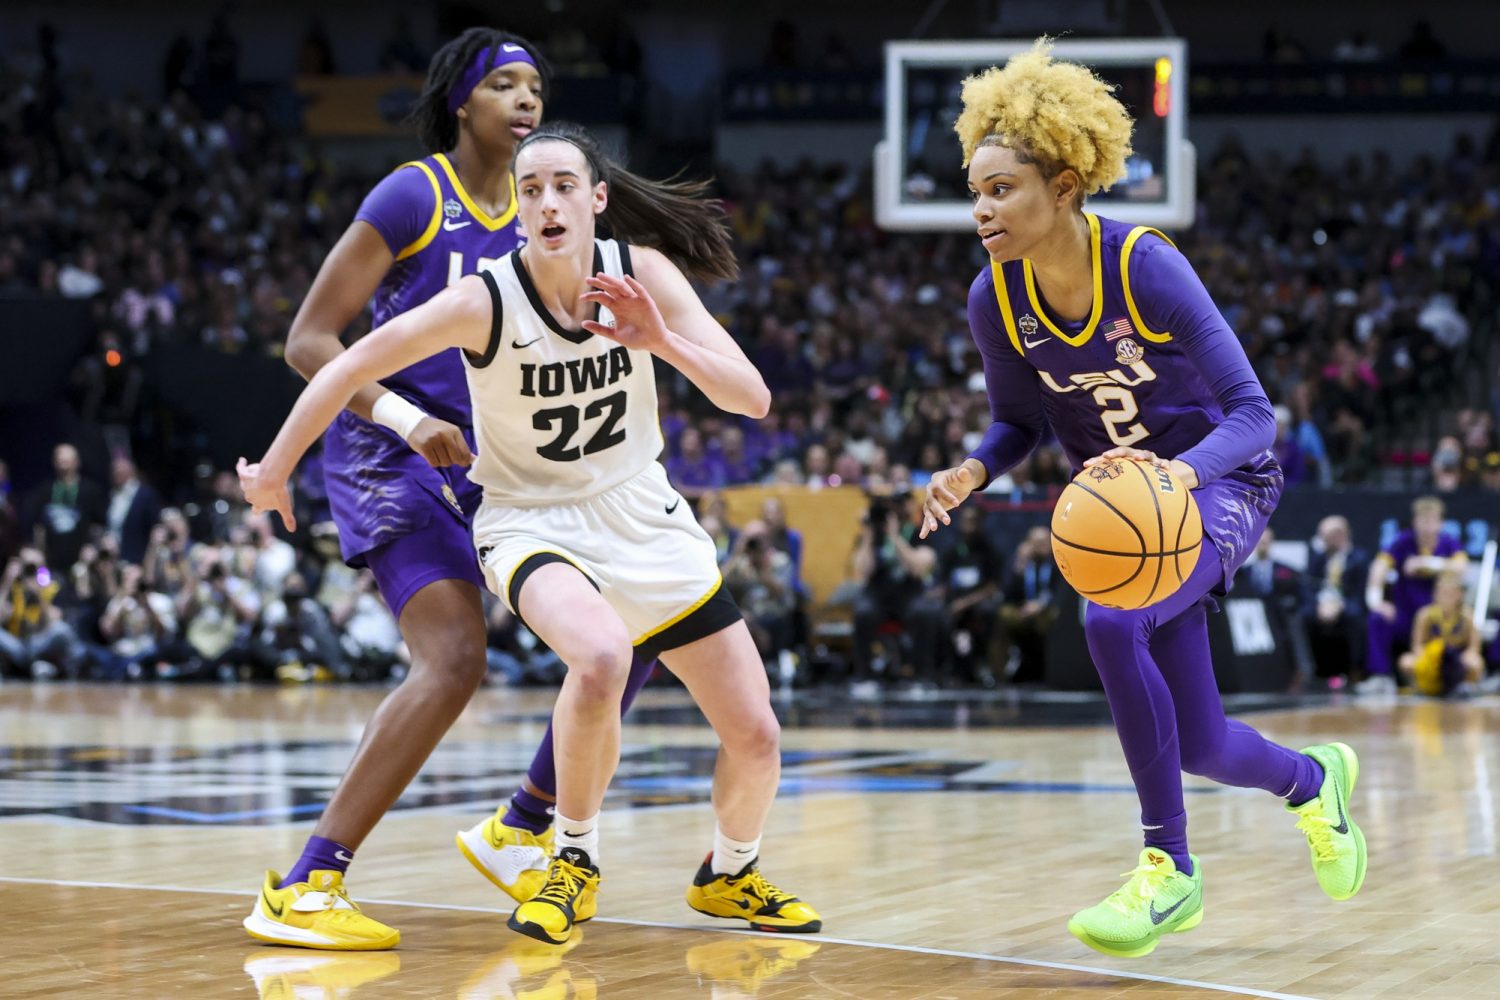 LSU Lady Tigers guard Jasmine Carson dribbles the ball against Iowa Hawkeyes guard Caitlin Clark in the first half during the final round of the Women's Final Four NCAA tournament at the American Airlines Center.